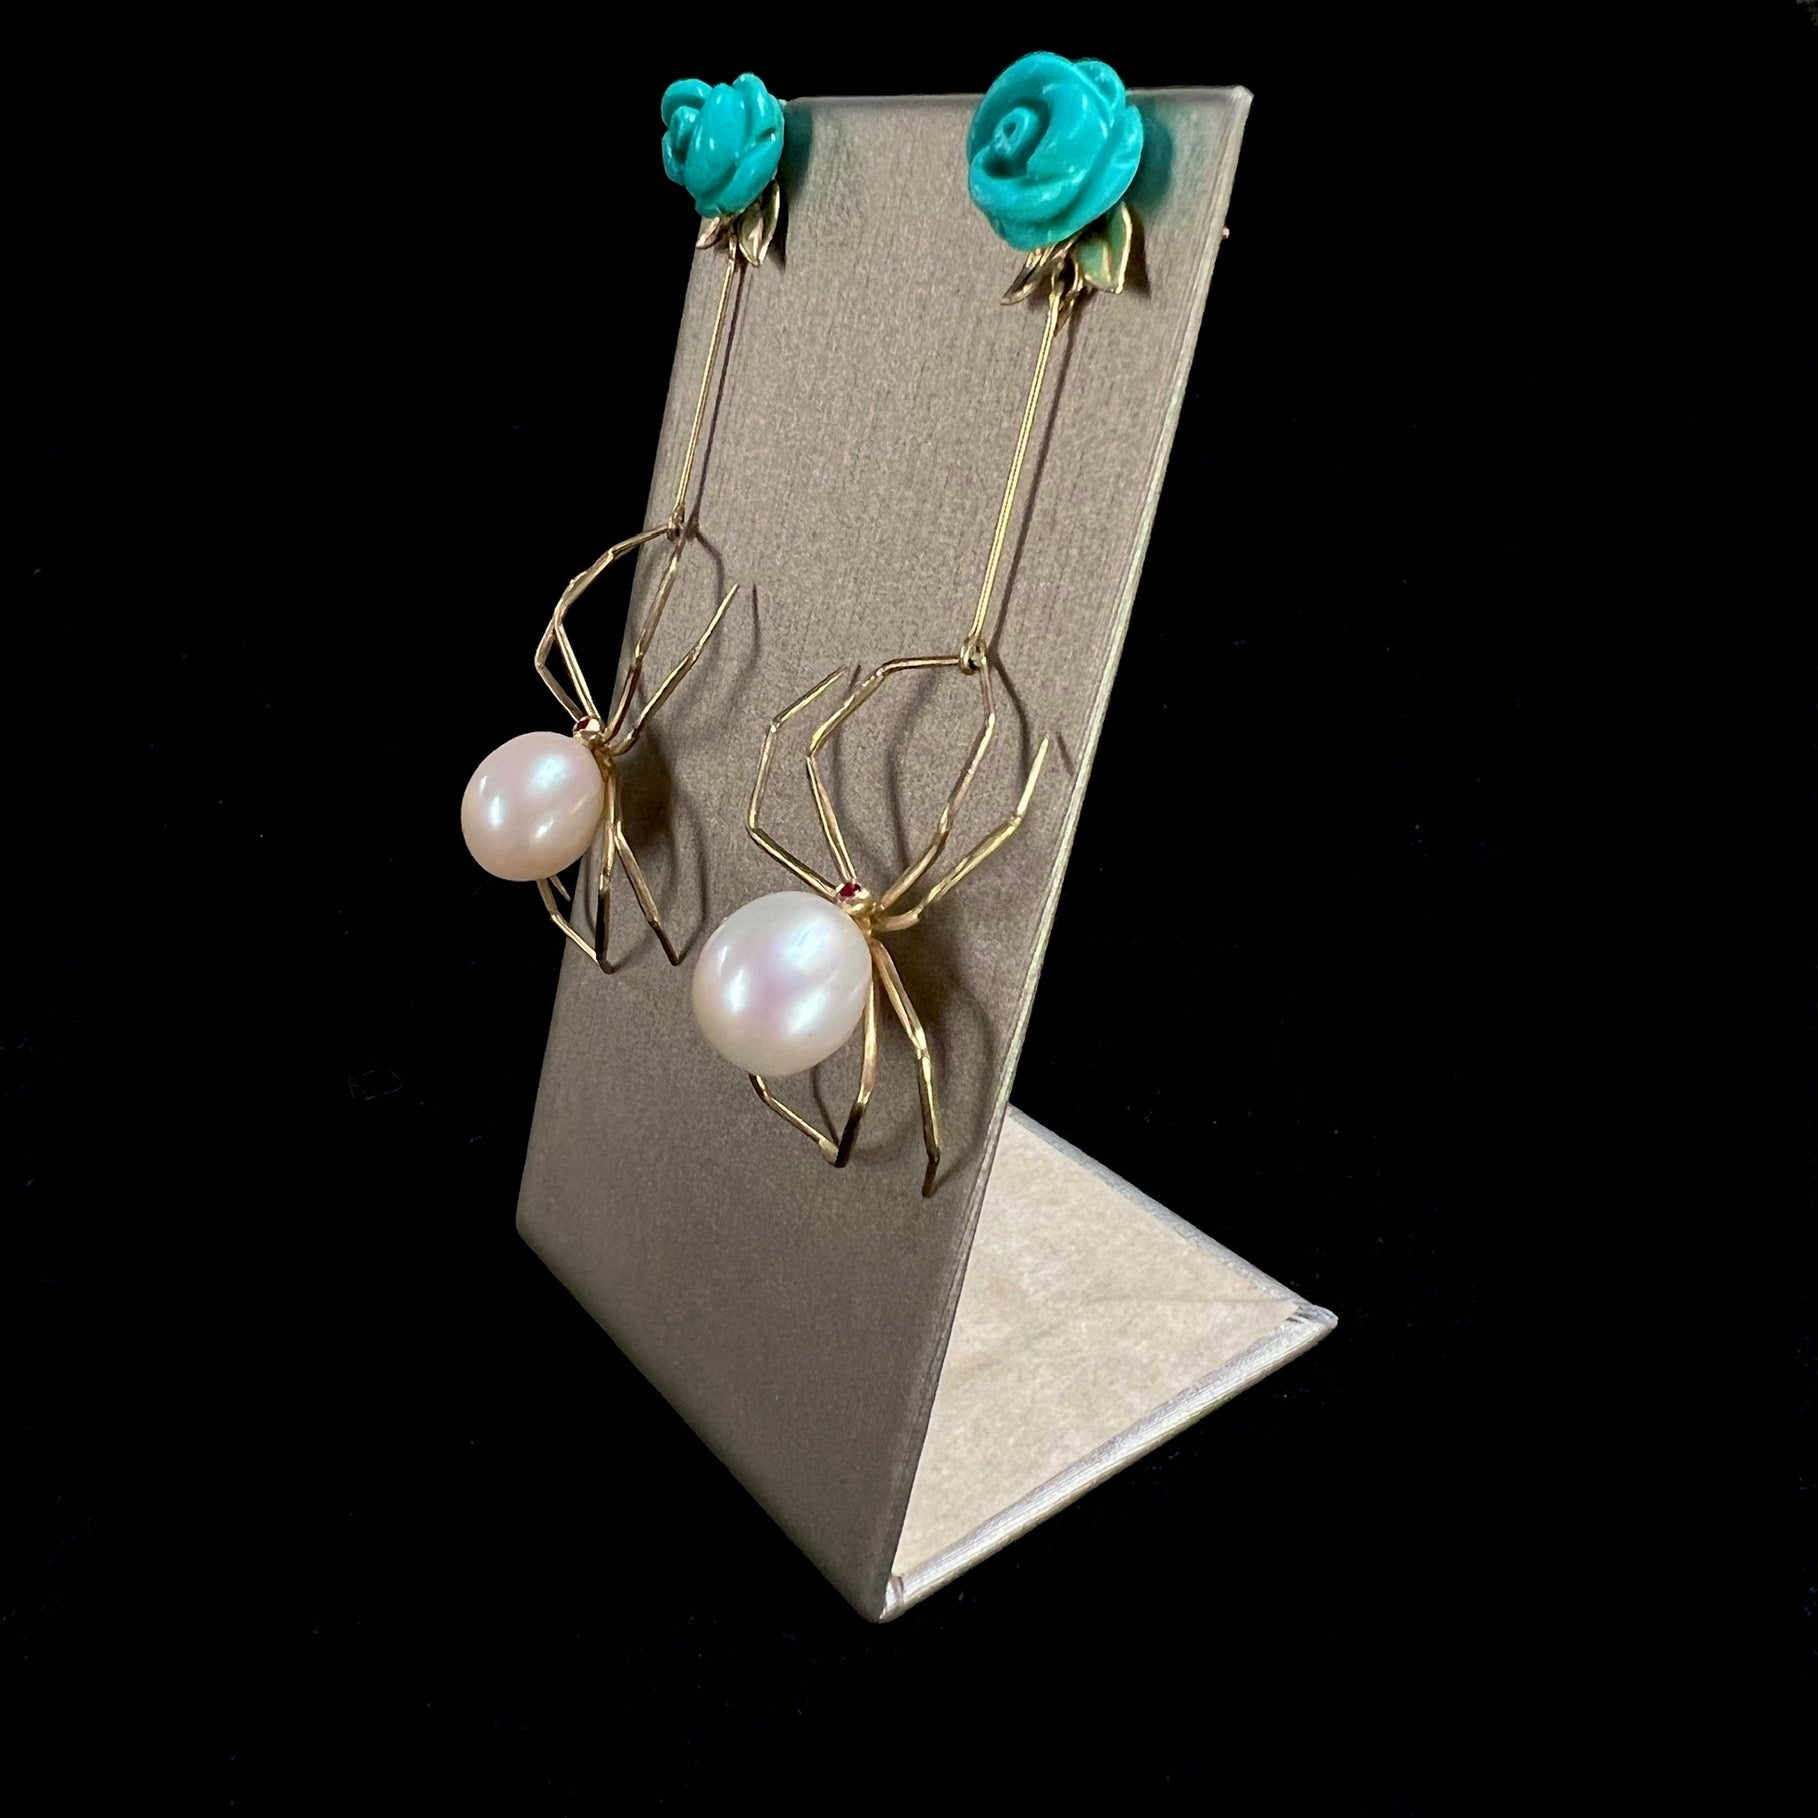 Side view of Turquoise and Pearl Spider Earrings on display stand